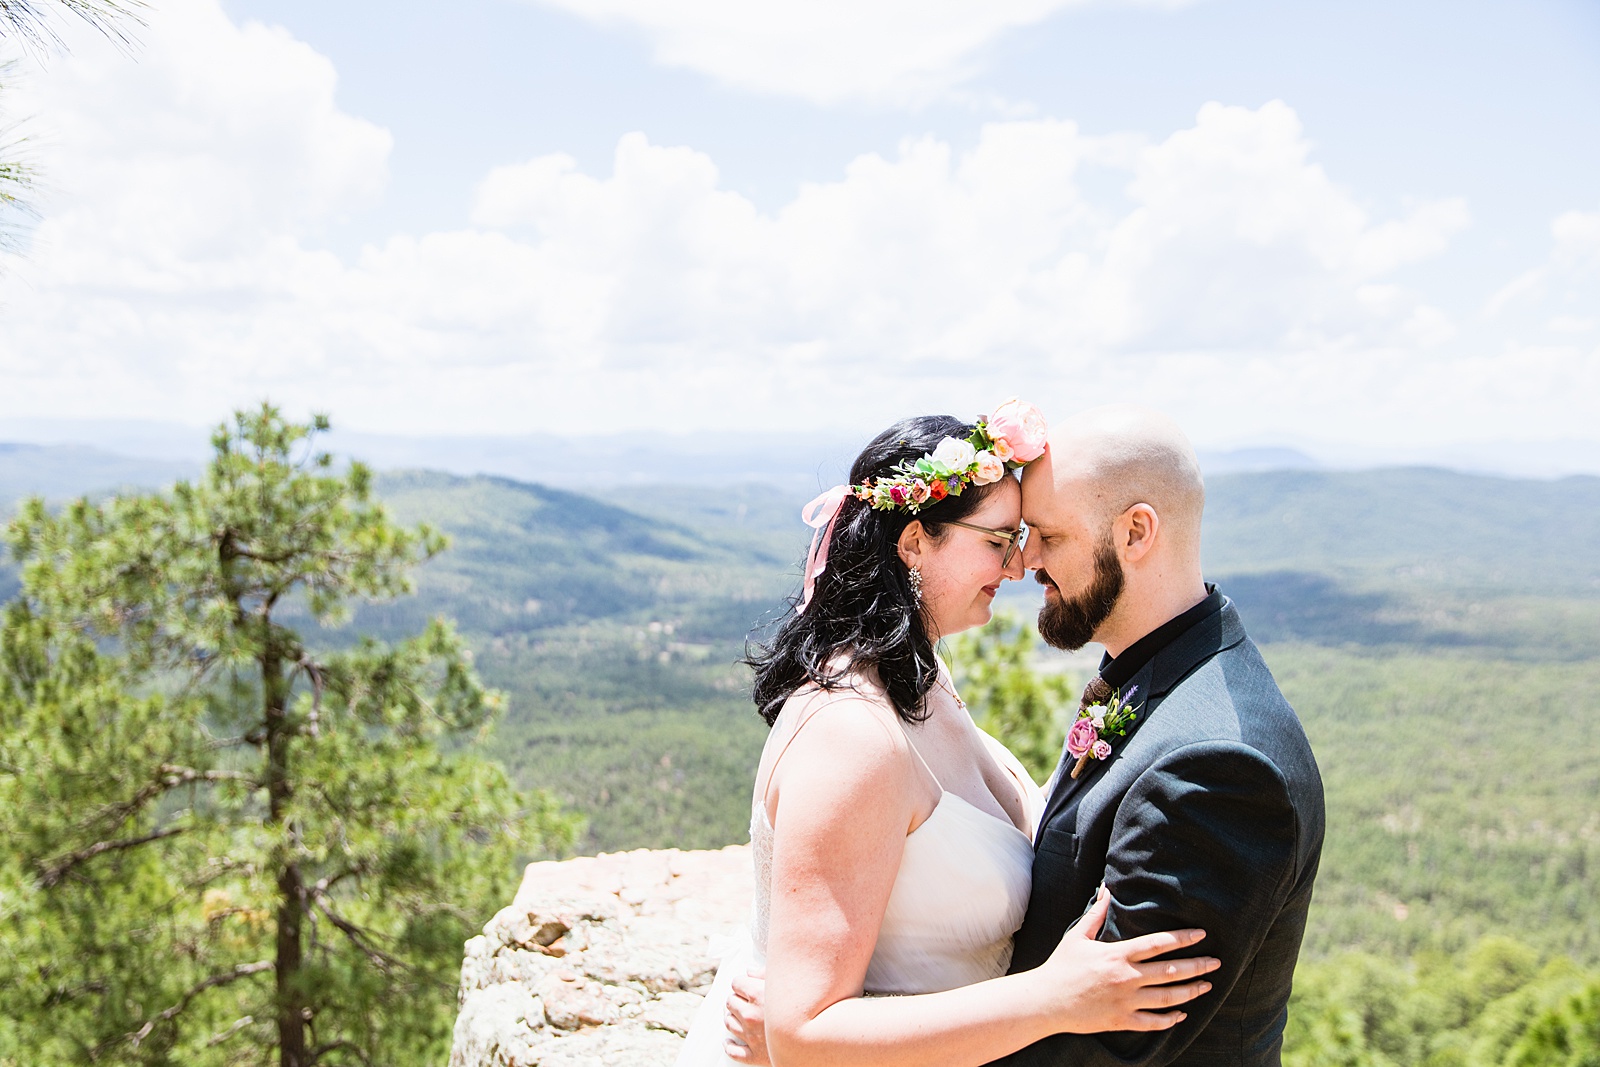 Bride & Groom share an intimate moment during their Mogollon Rim elopement by Payson elopement photographer PMA Photography.